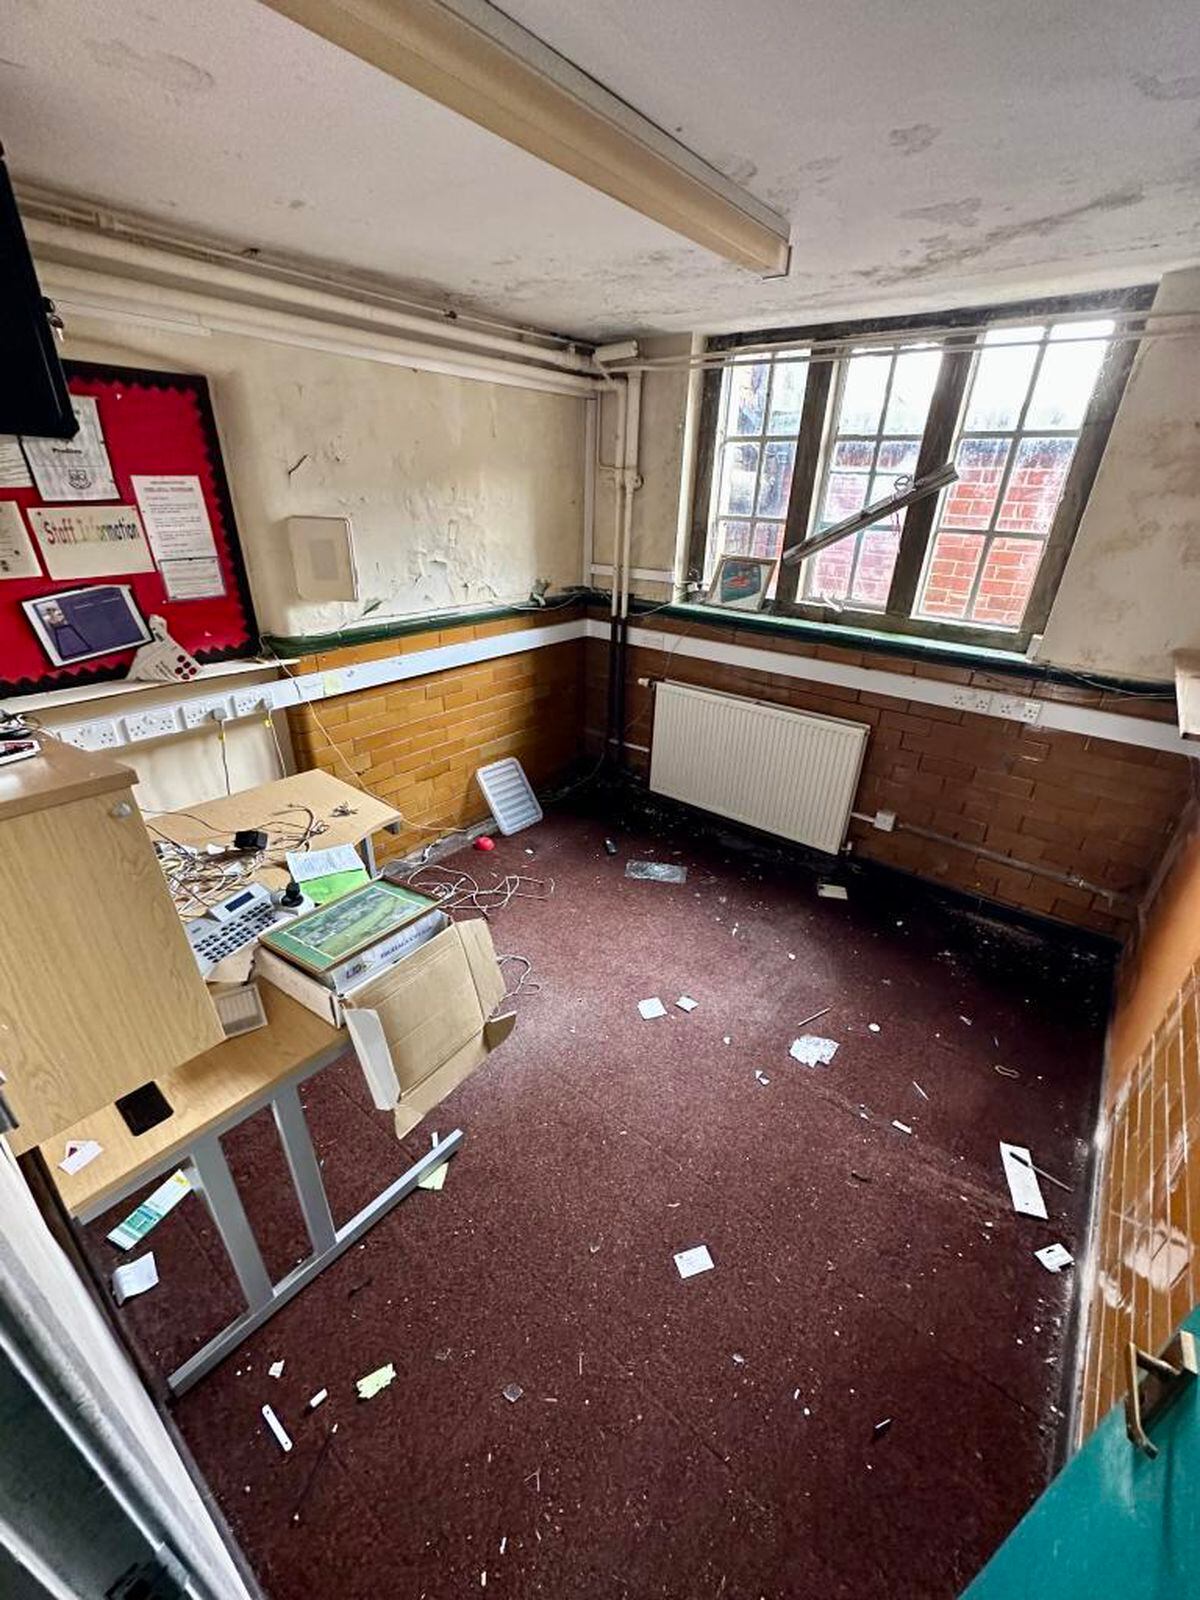 One of the classrooms. Picture: Rightmove